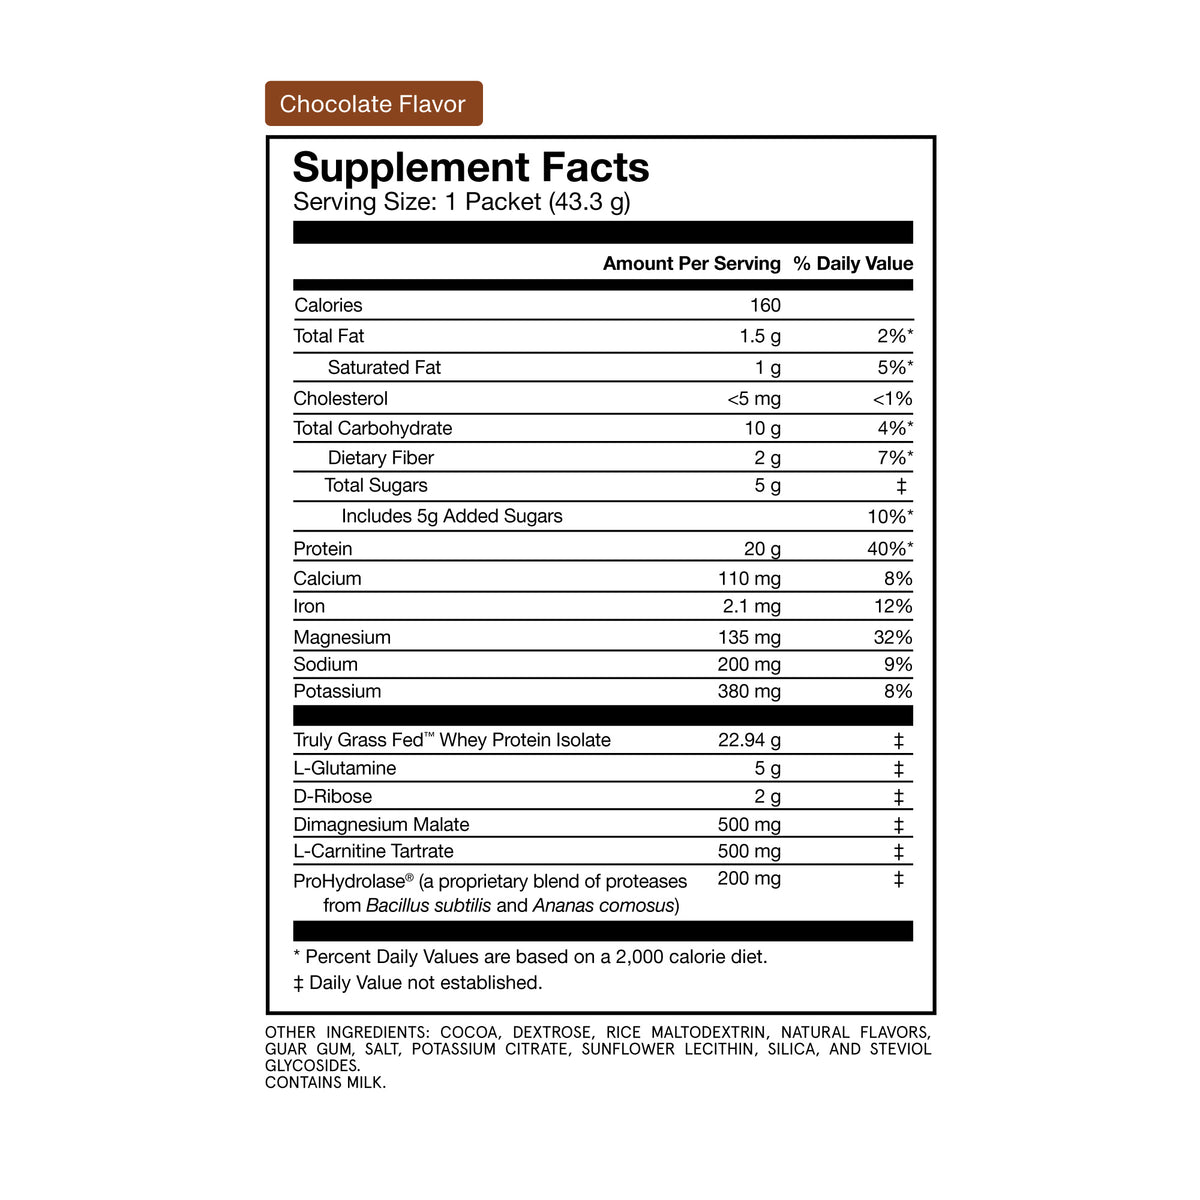 Chocolate flavored Recovery 14-Travel Packs Supplement Facts